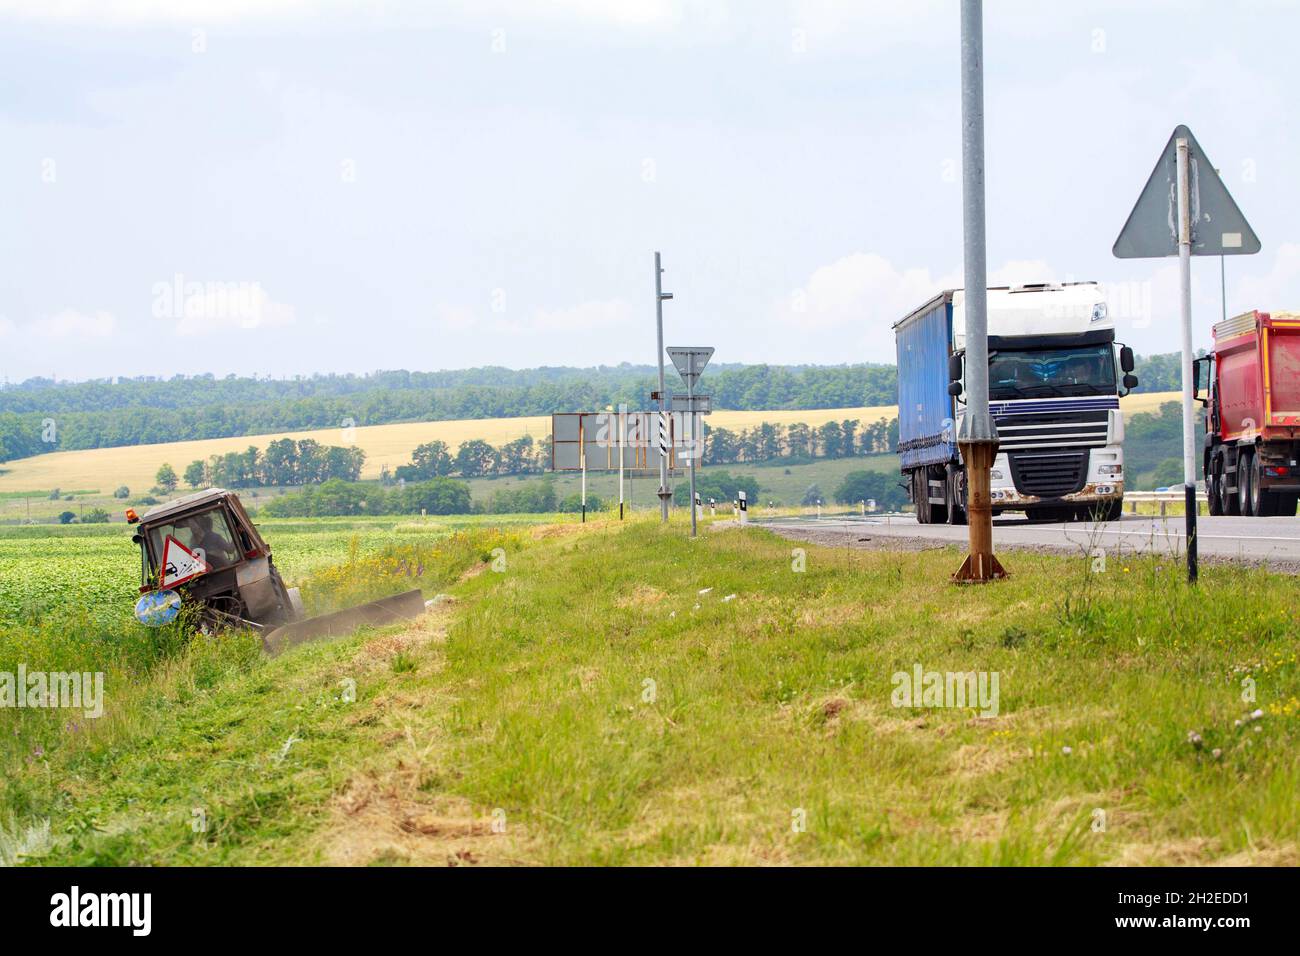 Tractor with a mechanical mower mowing grass on the side of the asphalt road Stock Photo